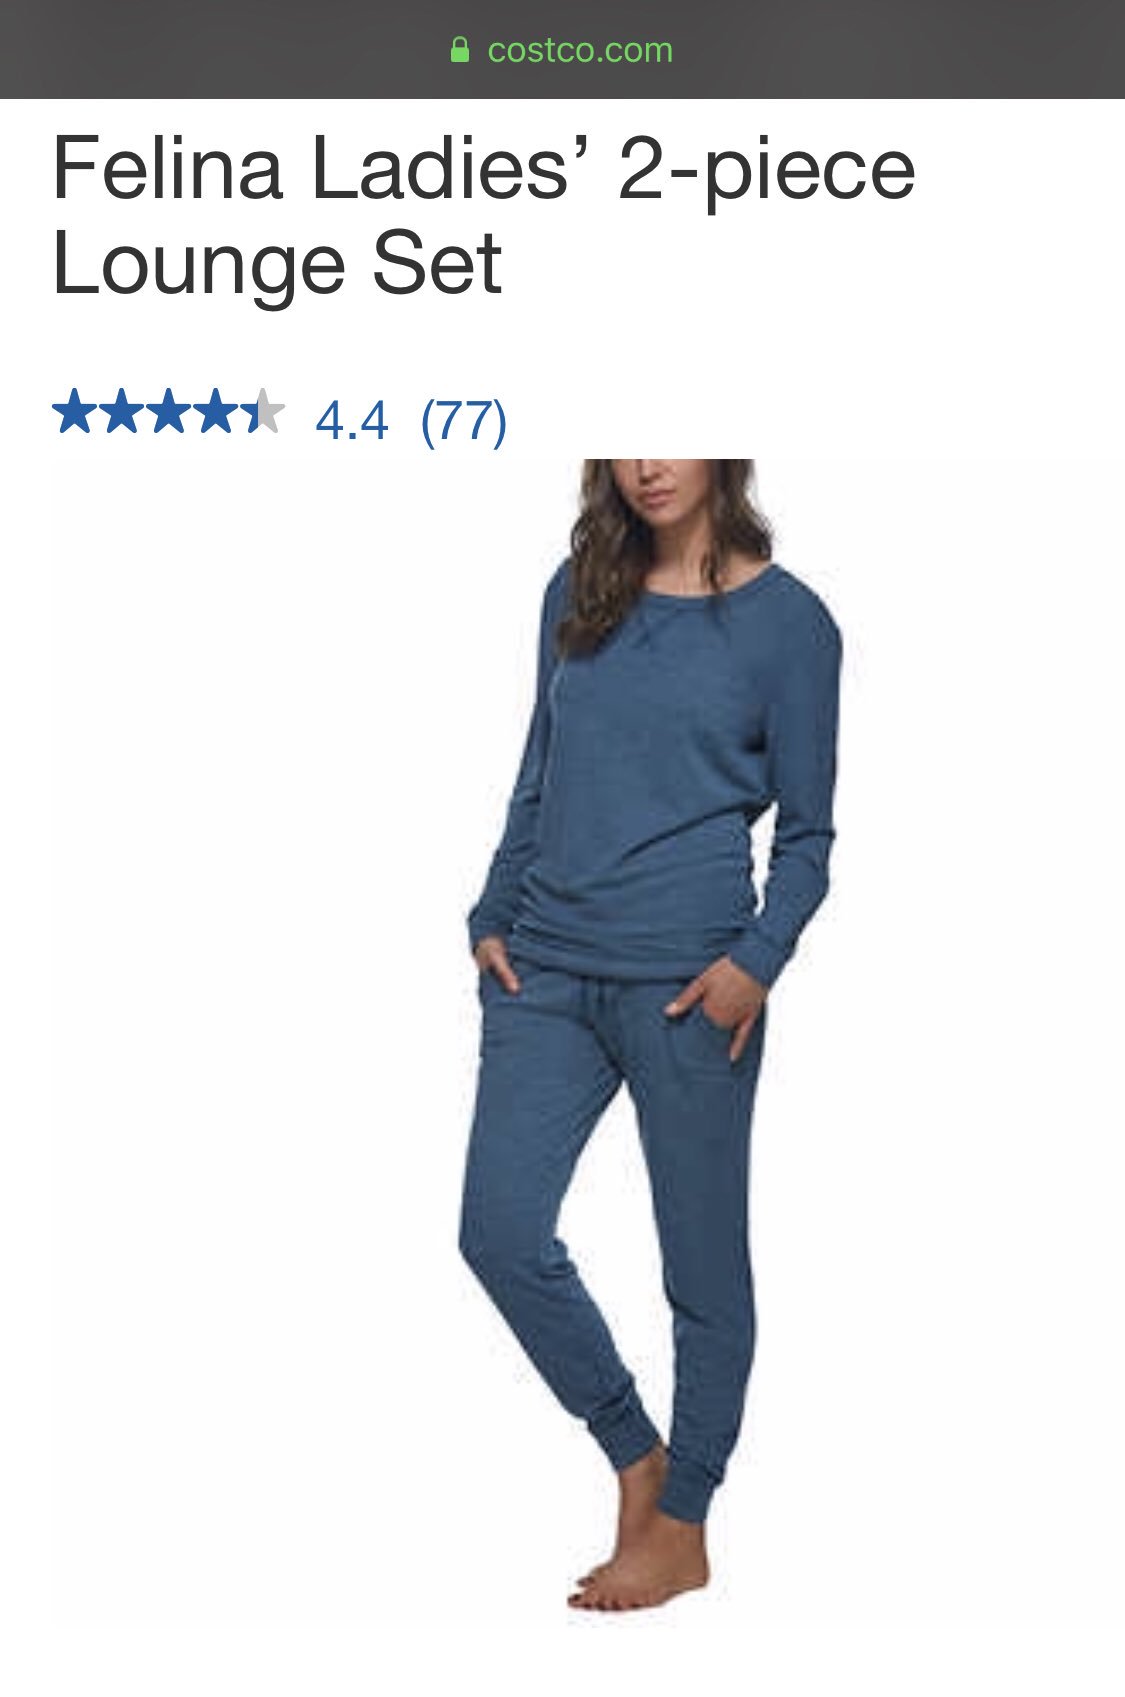 LibertyJ on X: Seriously? 1st pic, email letter from Costco 2nd pic, photo  of item on Costco website 3rd pic, my review of said item that Costco  deemed “inappropriate” WTAF?  /